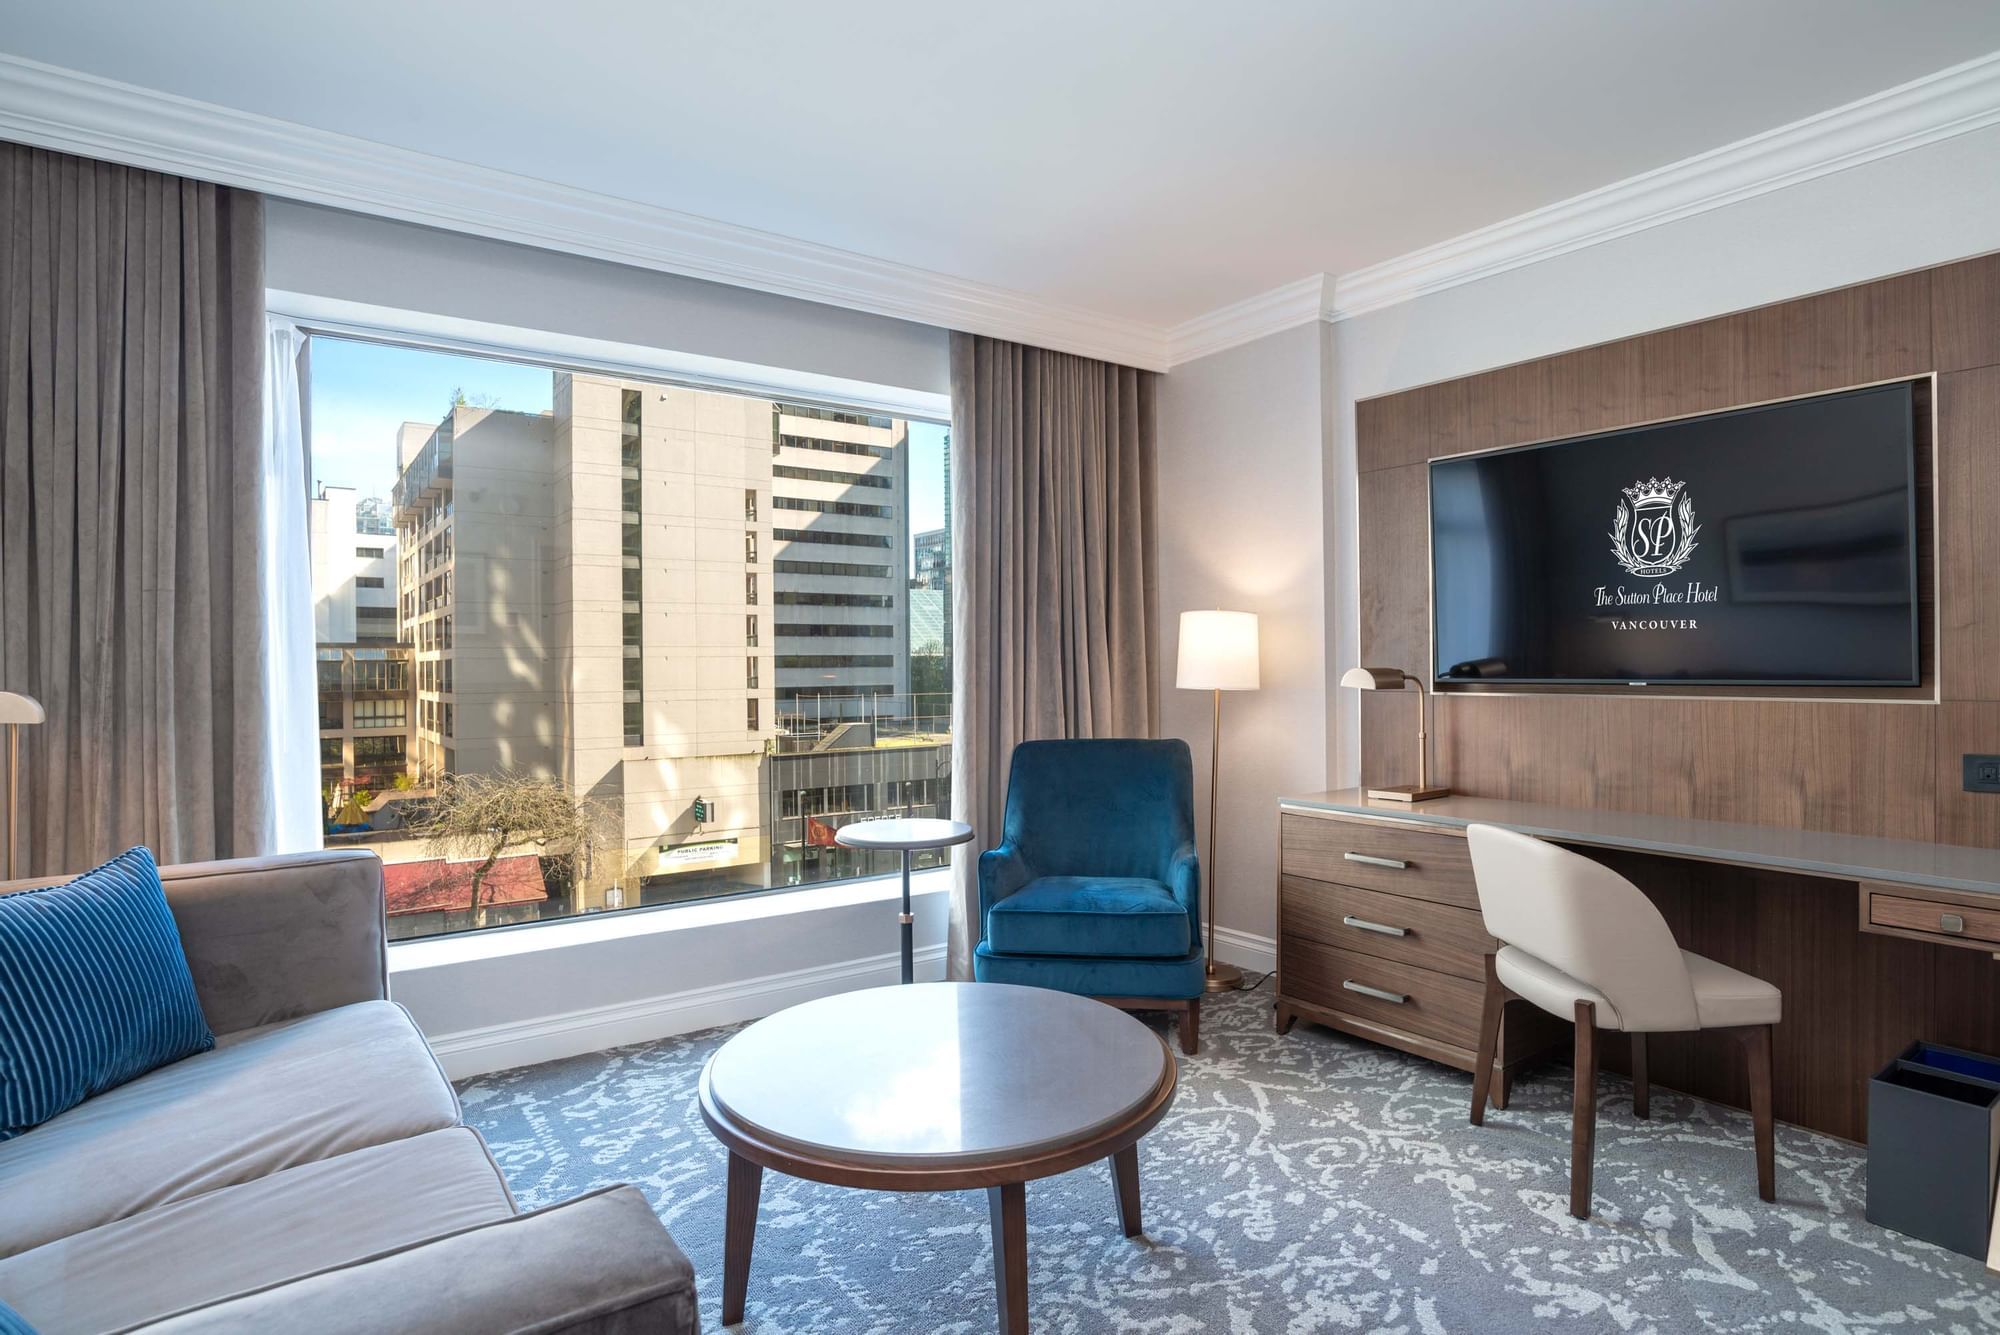 The Sutton Place Hotel Vancouver | Vancouver Hotels